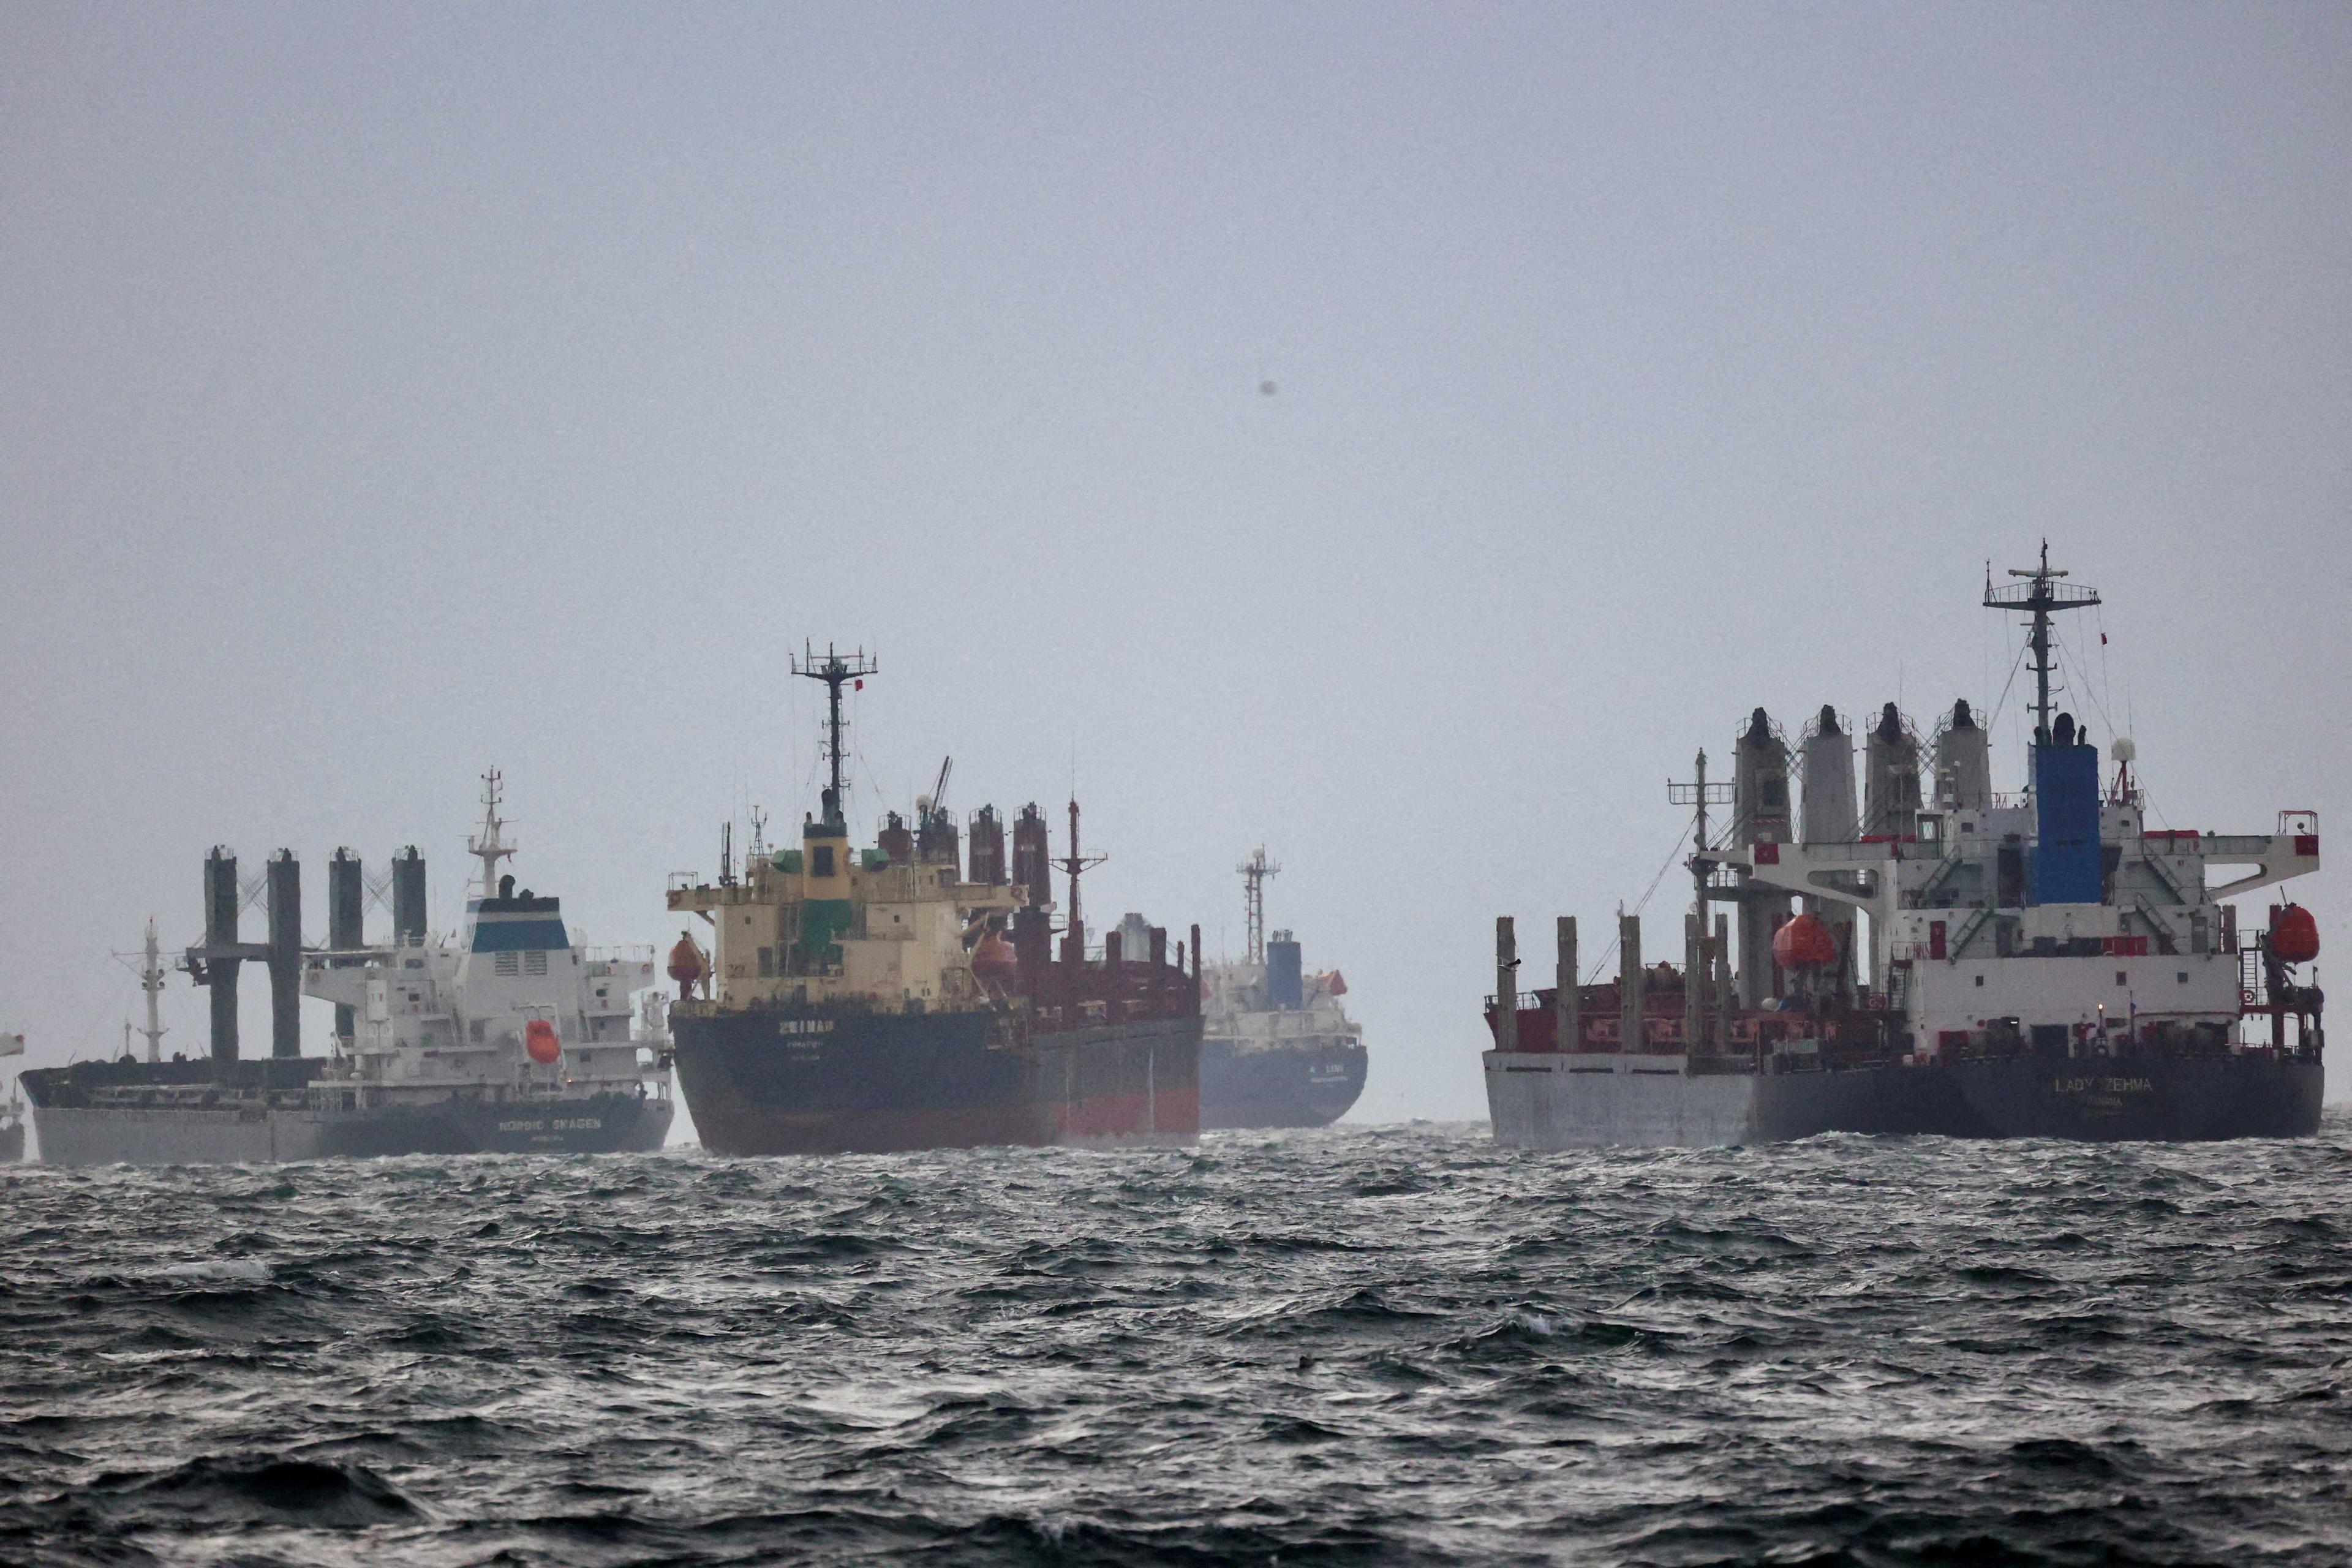 Vessels are seen as they wait for inspection under United Nation's Black Sea Grain Initiative in the southern anchorage of the Bosphorus in Istanbul, Turkey Dec 11, 2022. Photo: Reuters